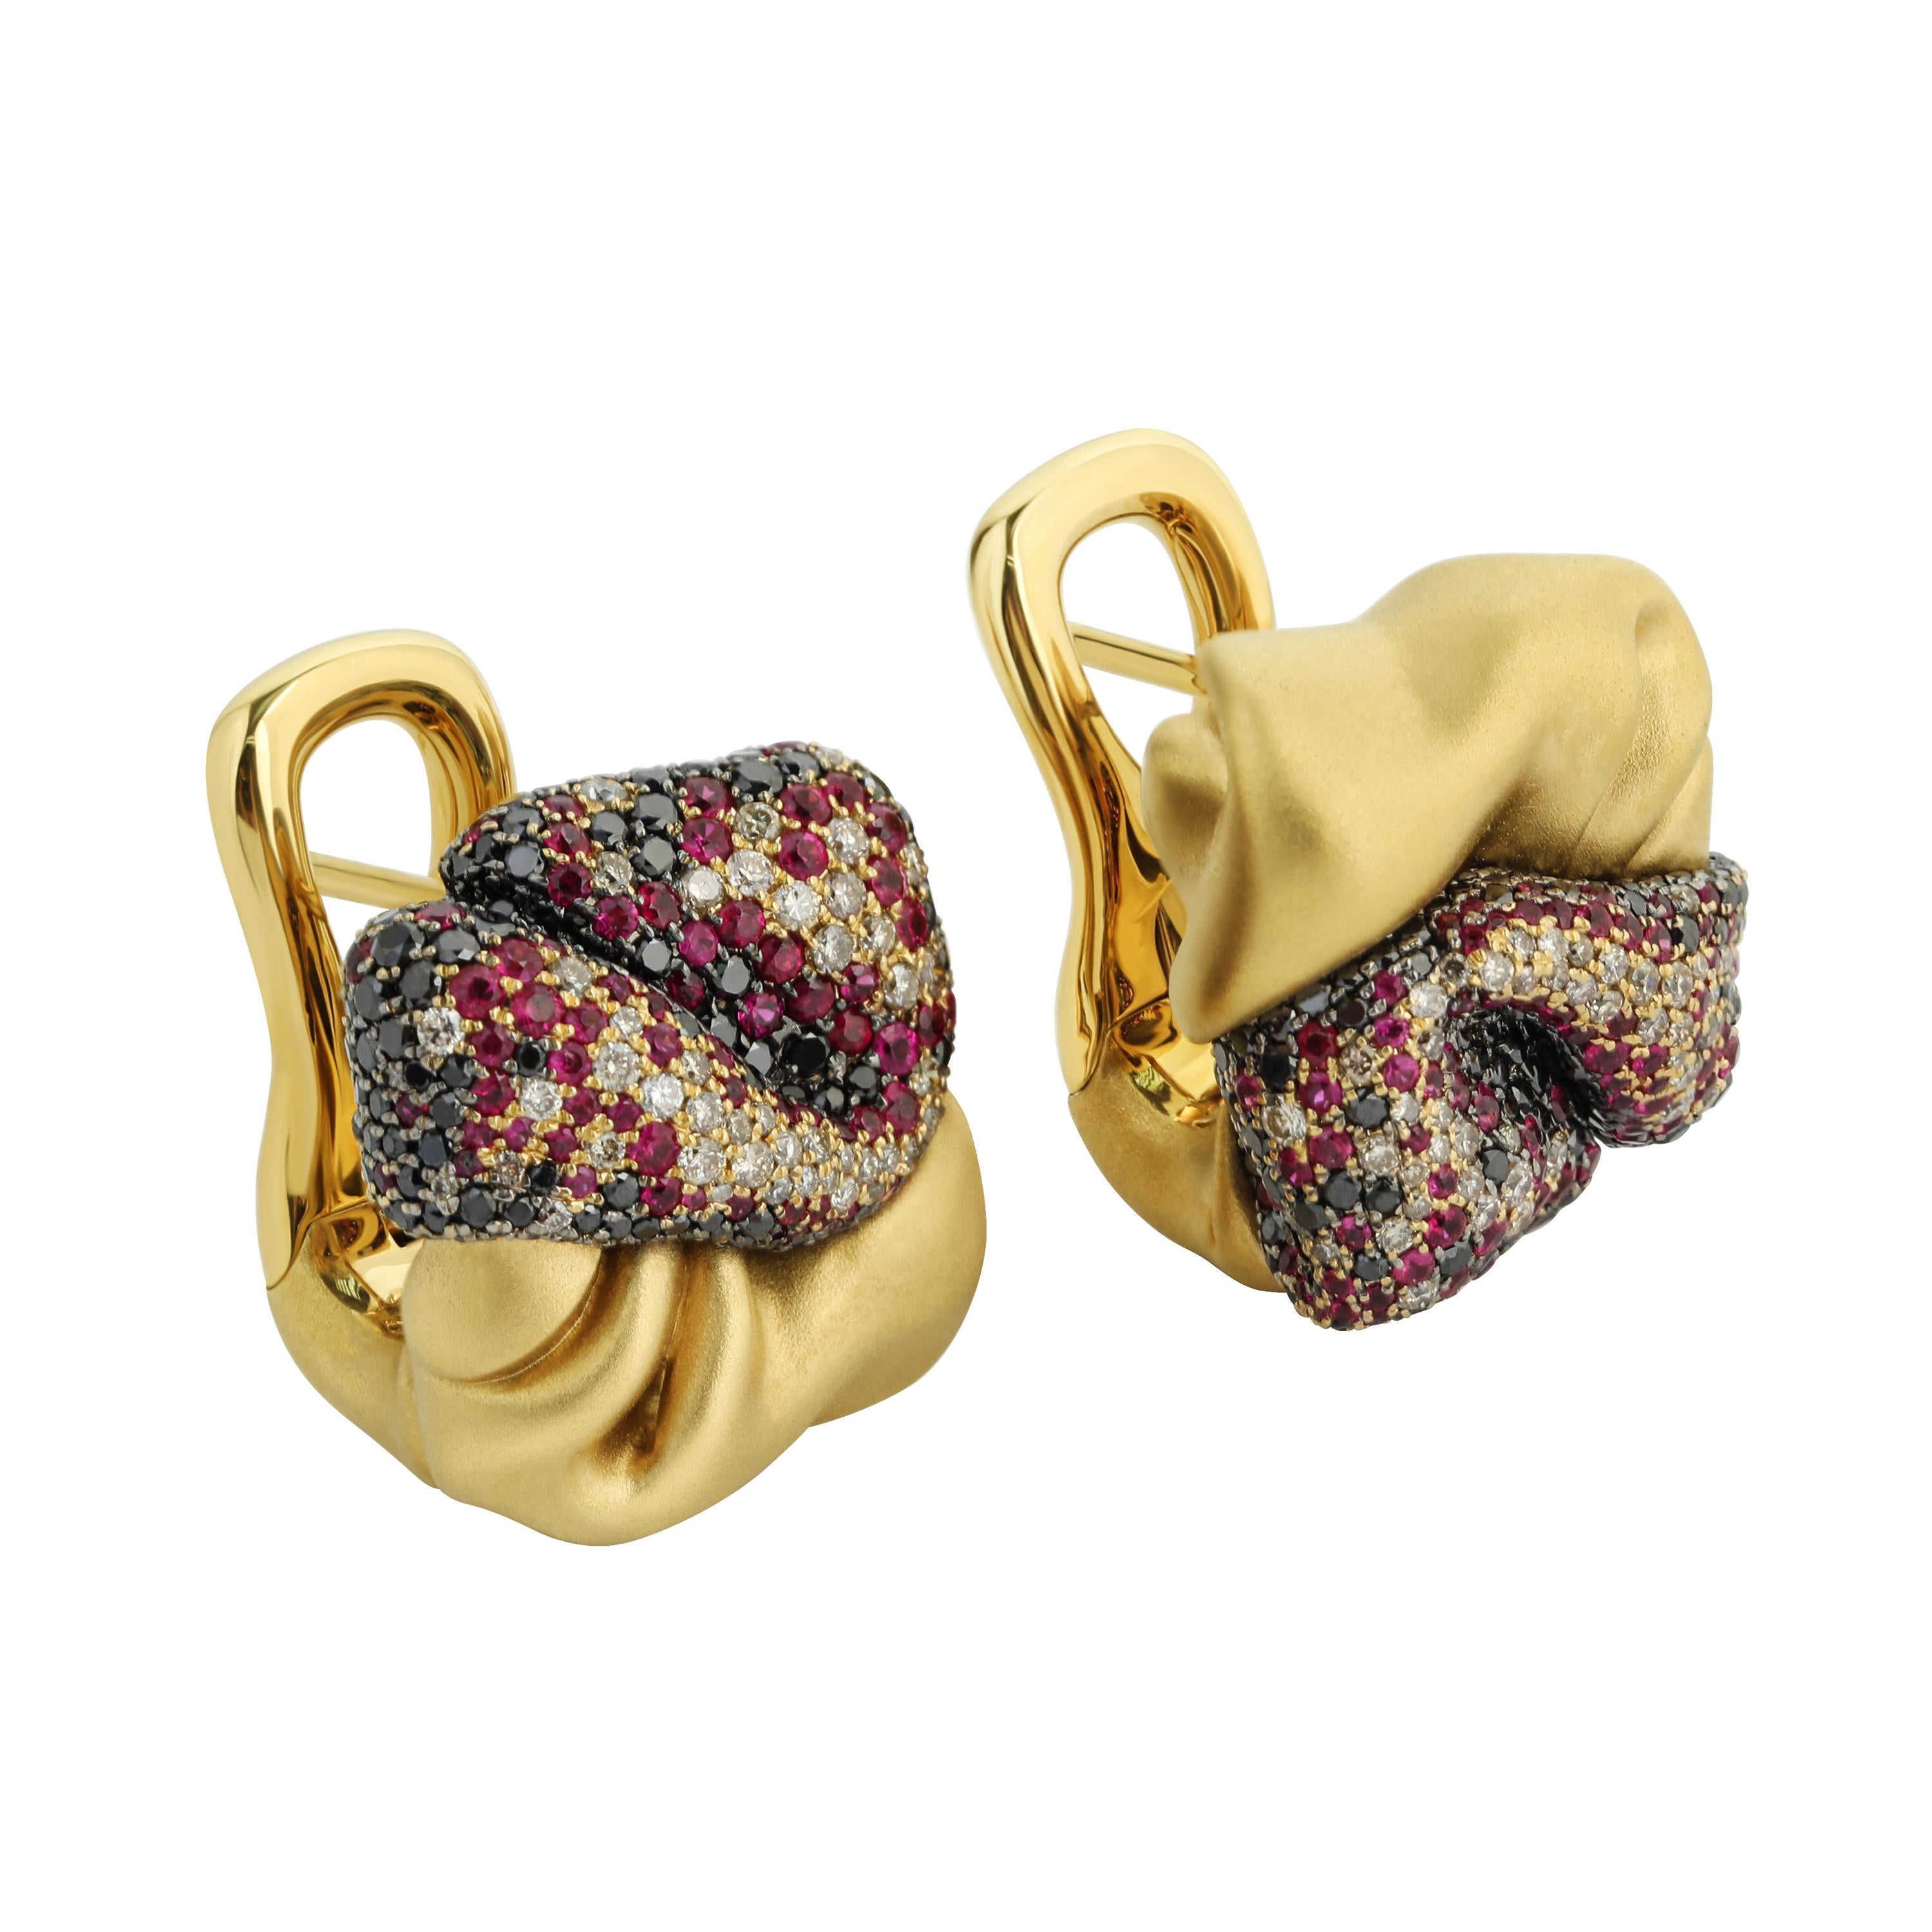 Black Diamonds Ruby Champagne Diamonds 18 Karat Yellow Gold Earrings
Our Pret-a-Porter collection is full of different textures and patterns. This time we decided to depict just a piece of crumpled fabric in the Earrings. One part of the Earring is